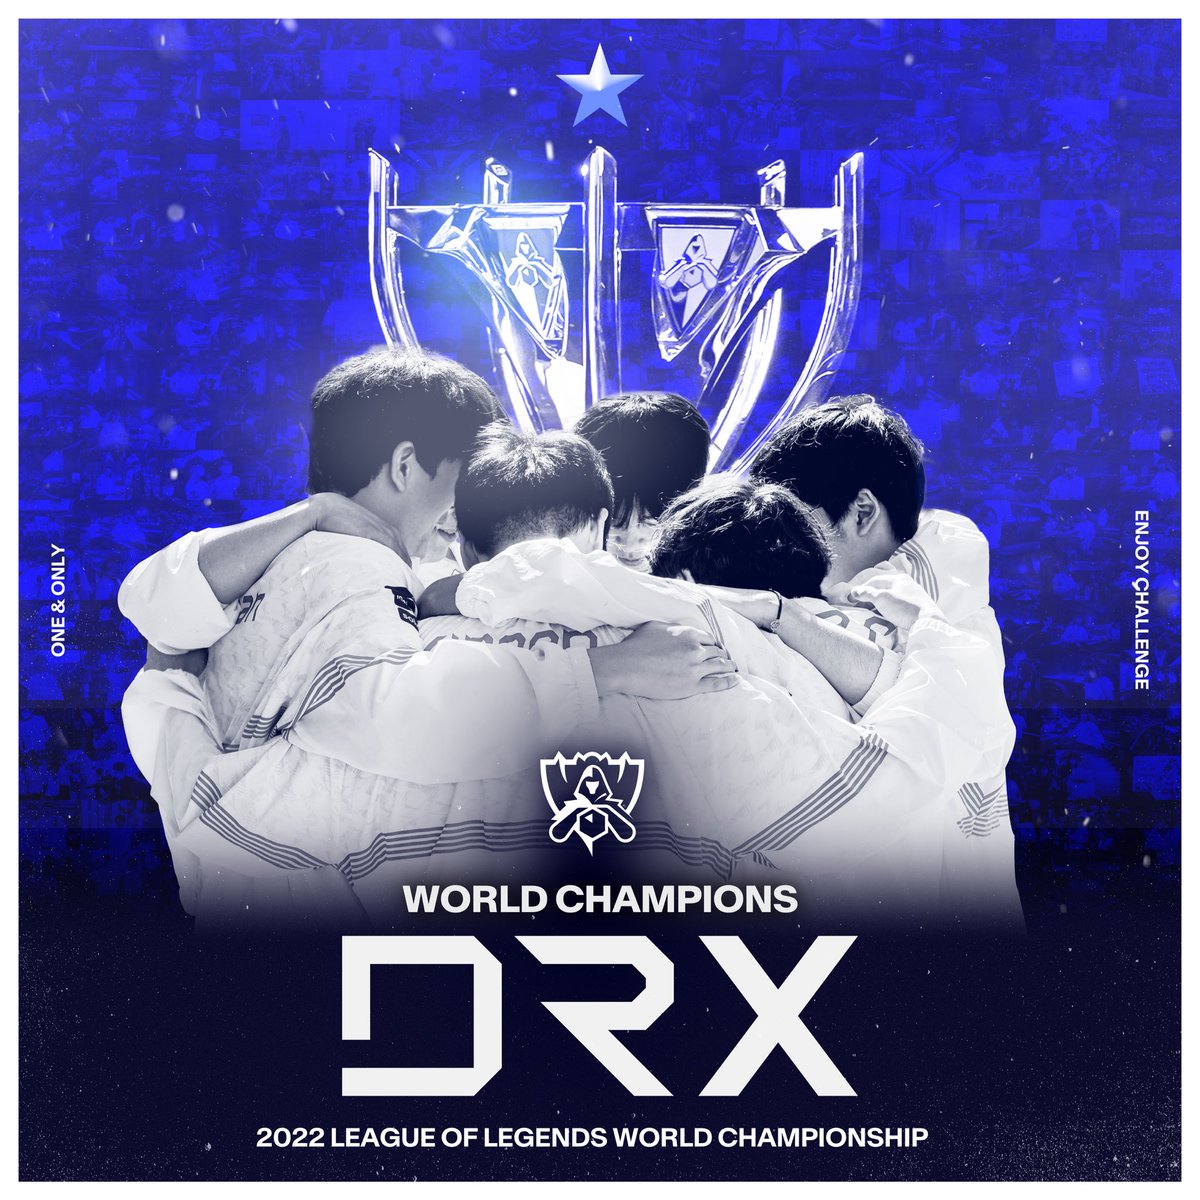 ONE & ONLY DRX ⭐
️
#GoDRX #DRXWIN #Worlds2022 #Champions